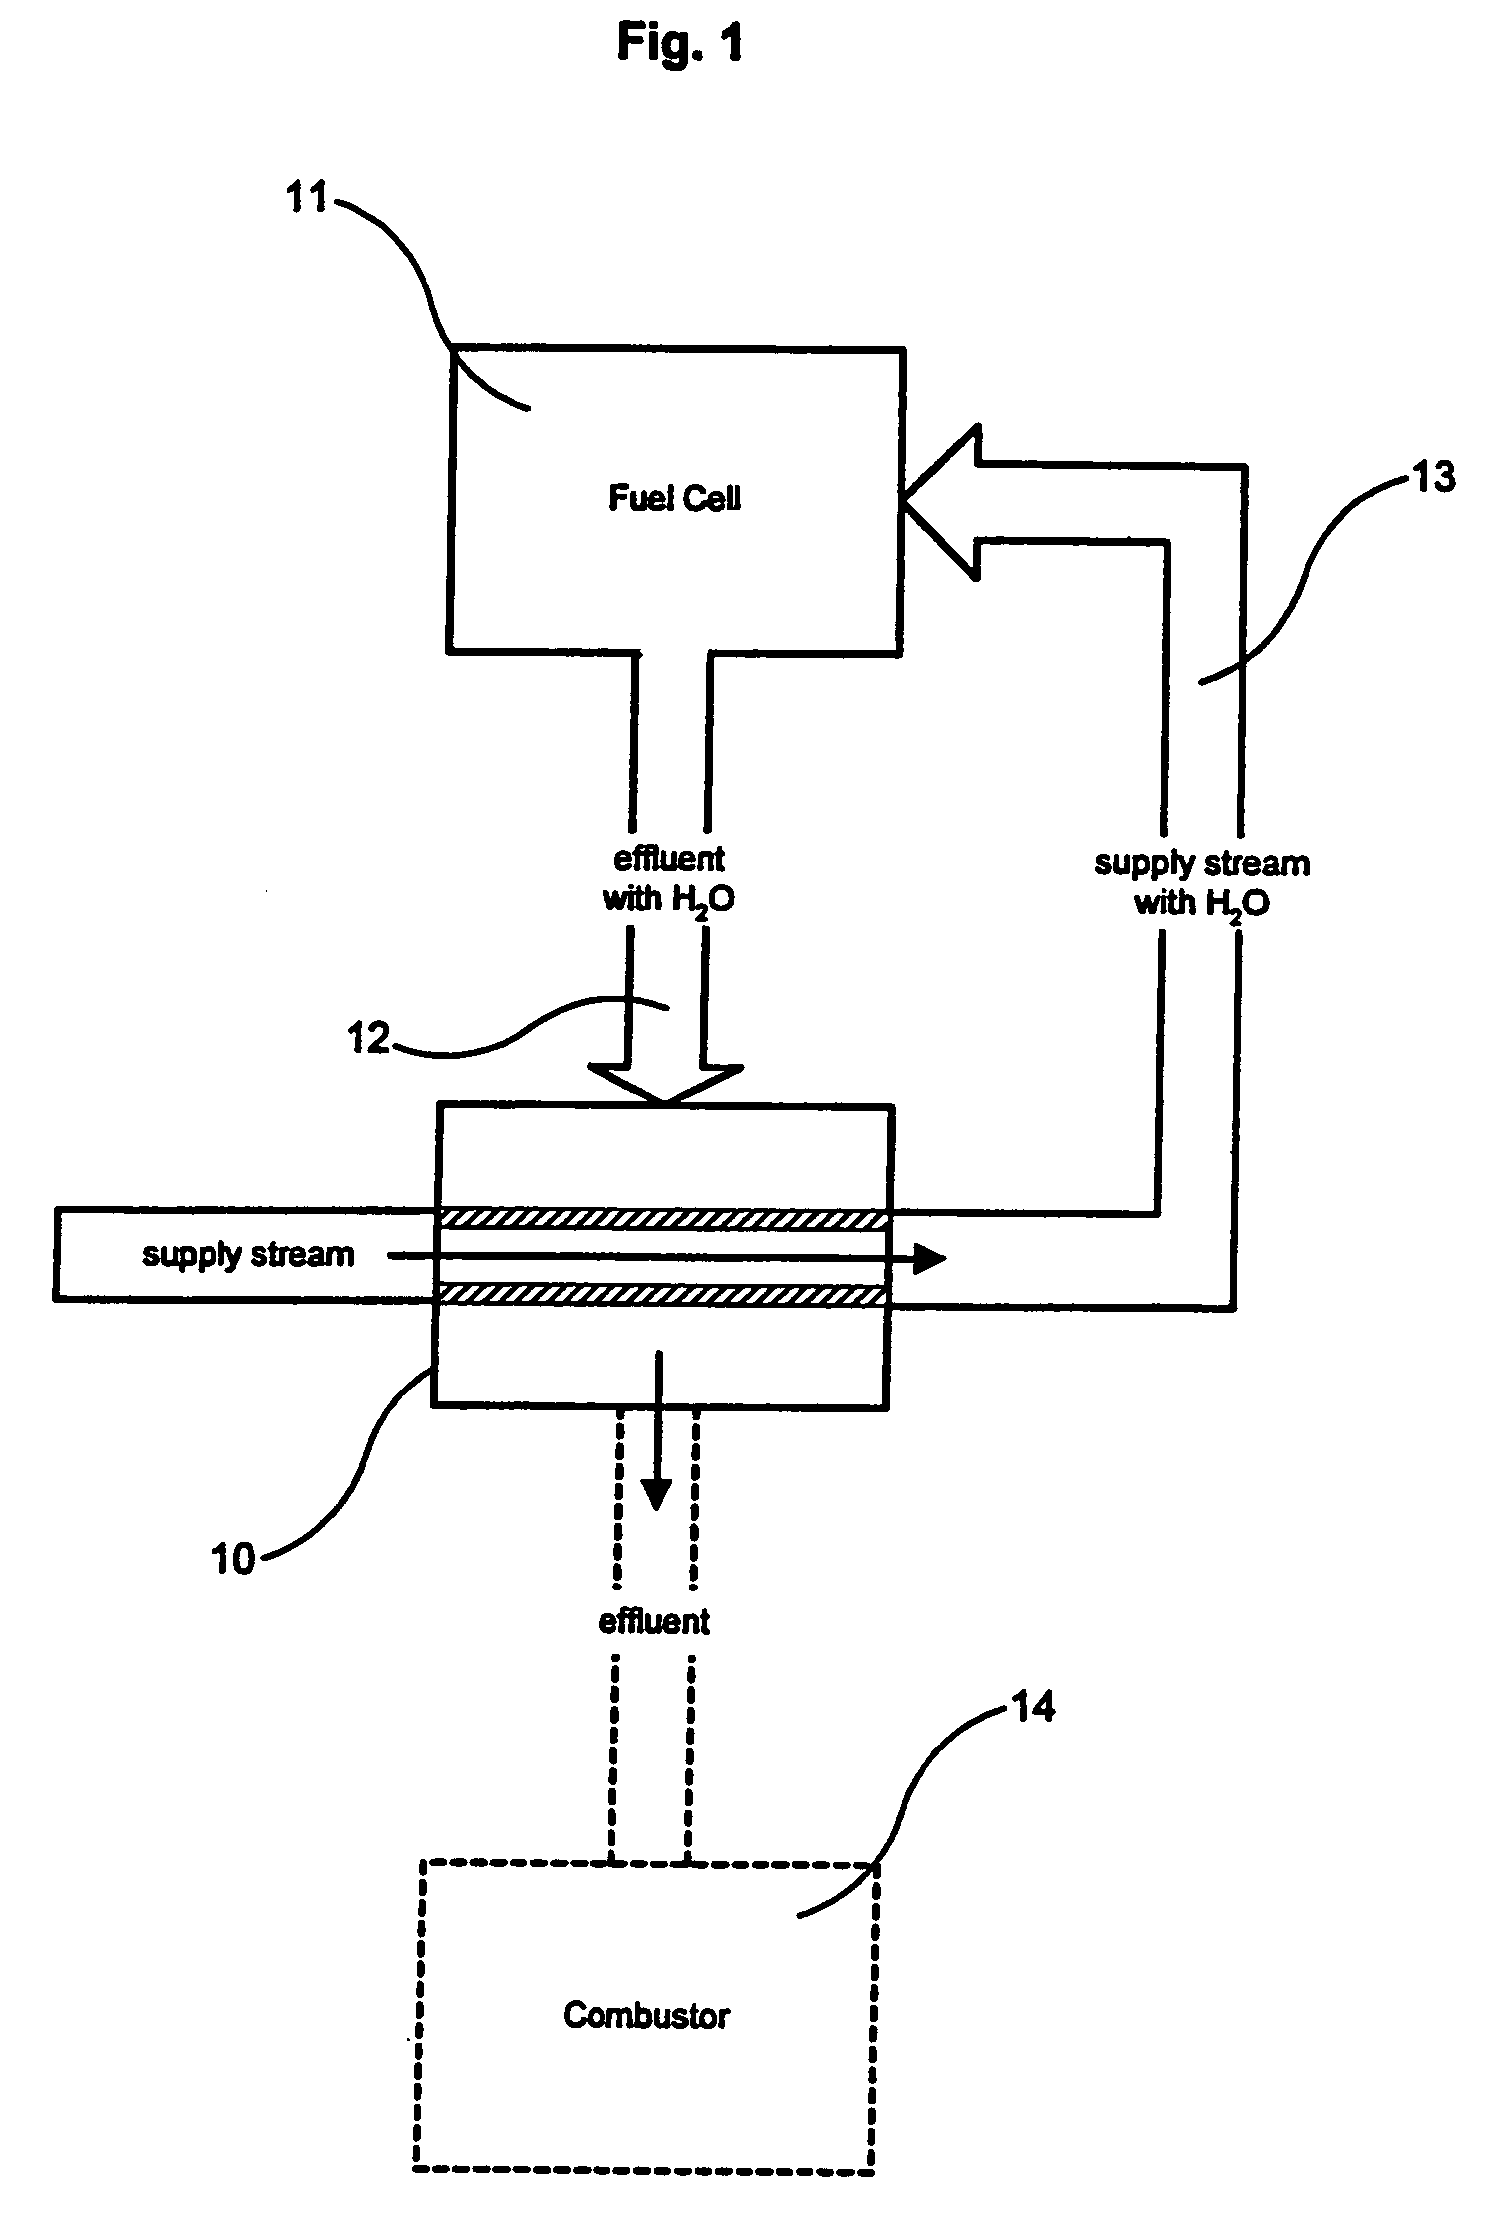 Method of operating a fuel cell power plant